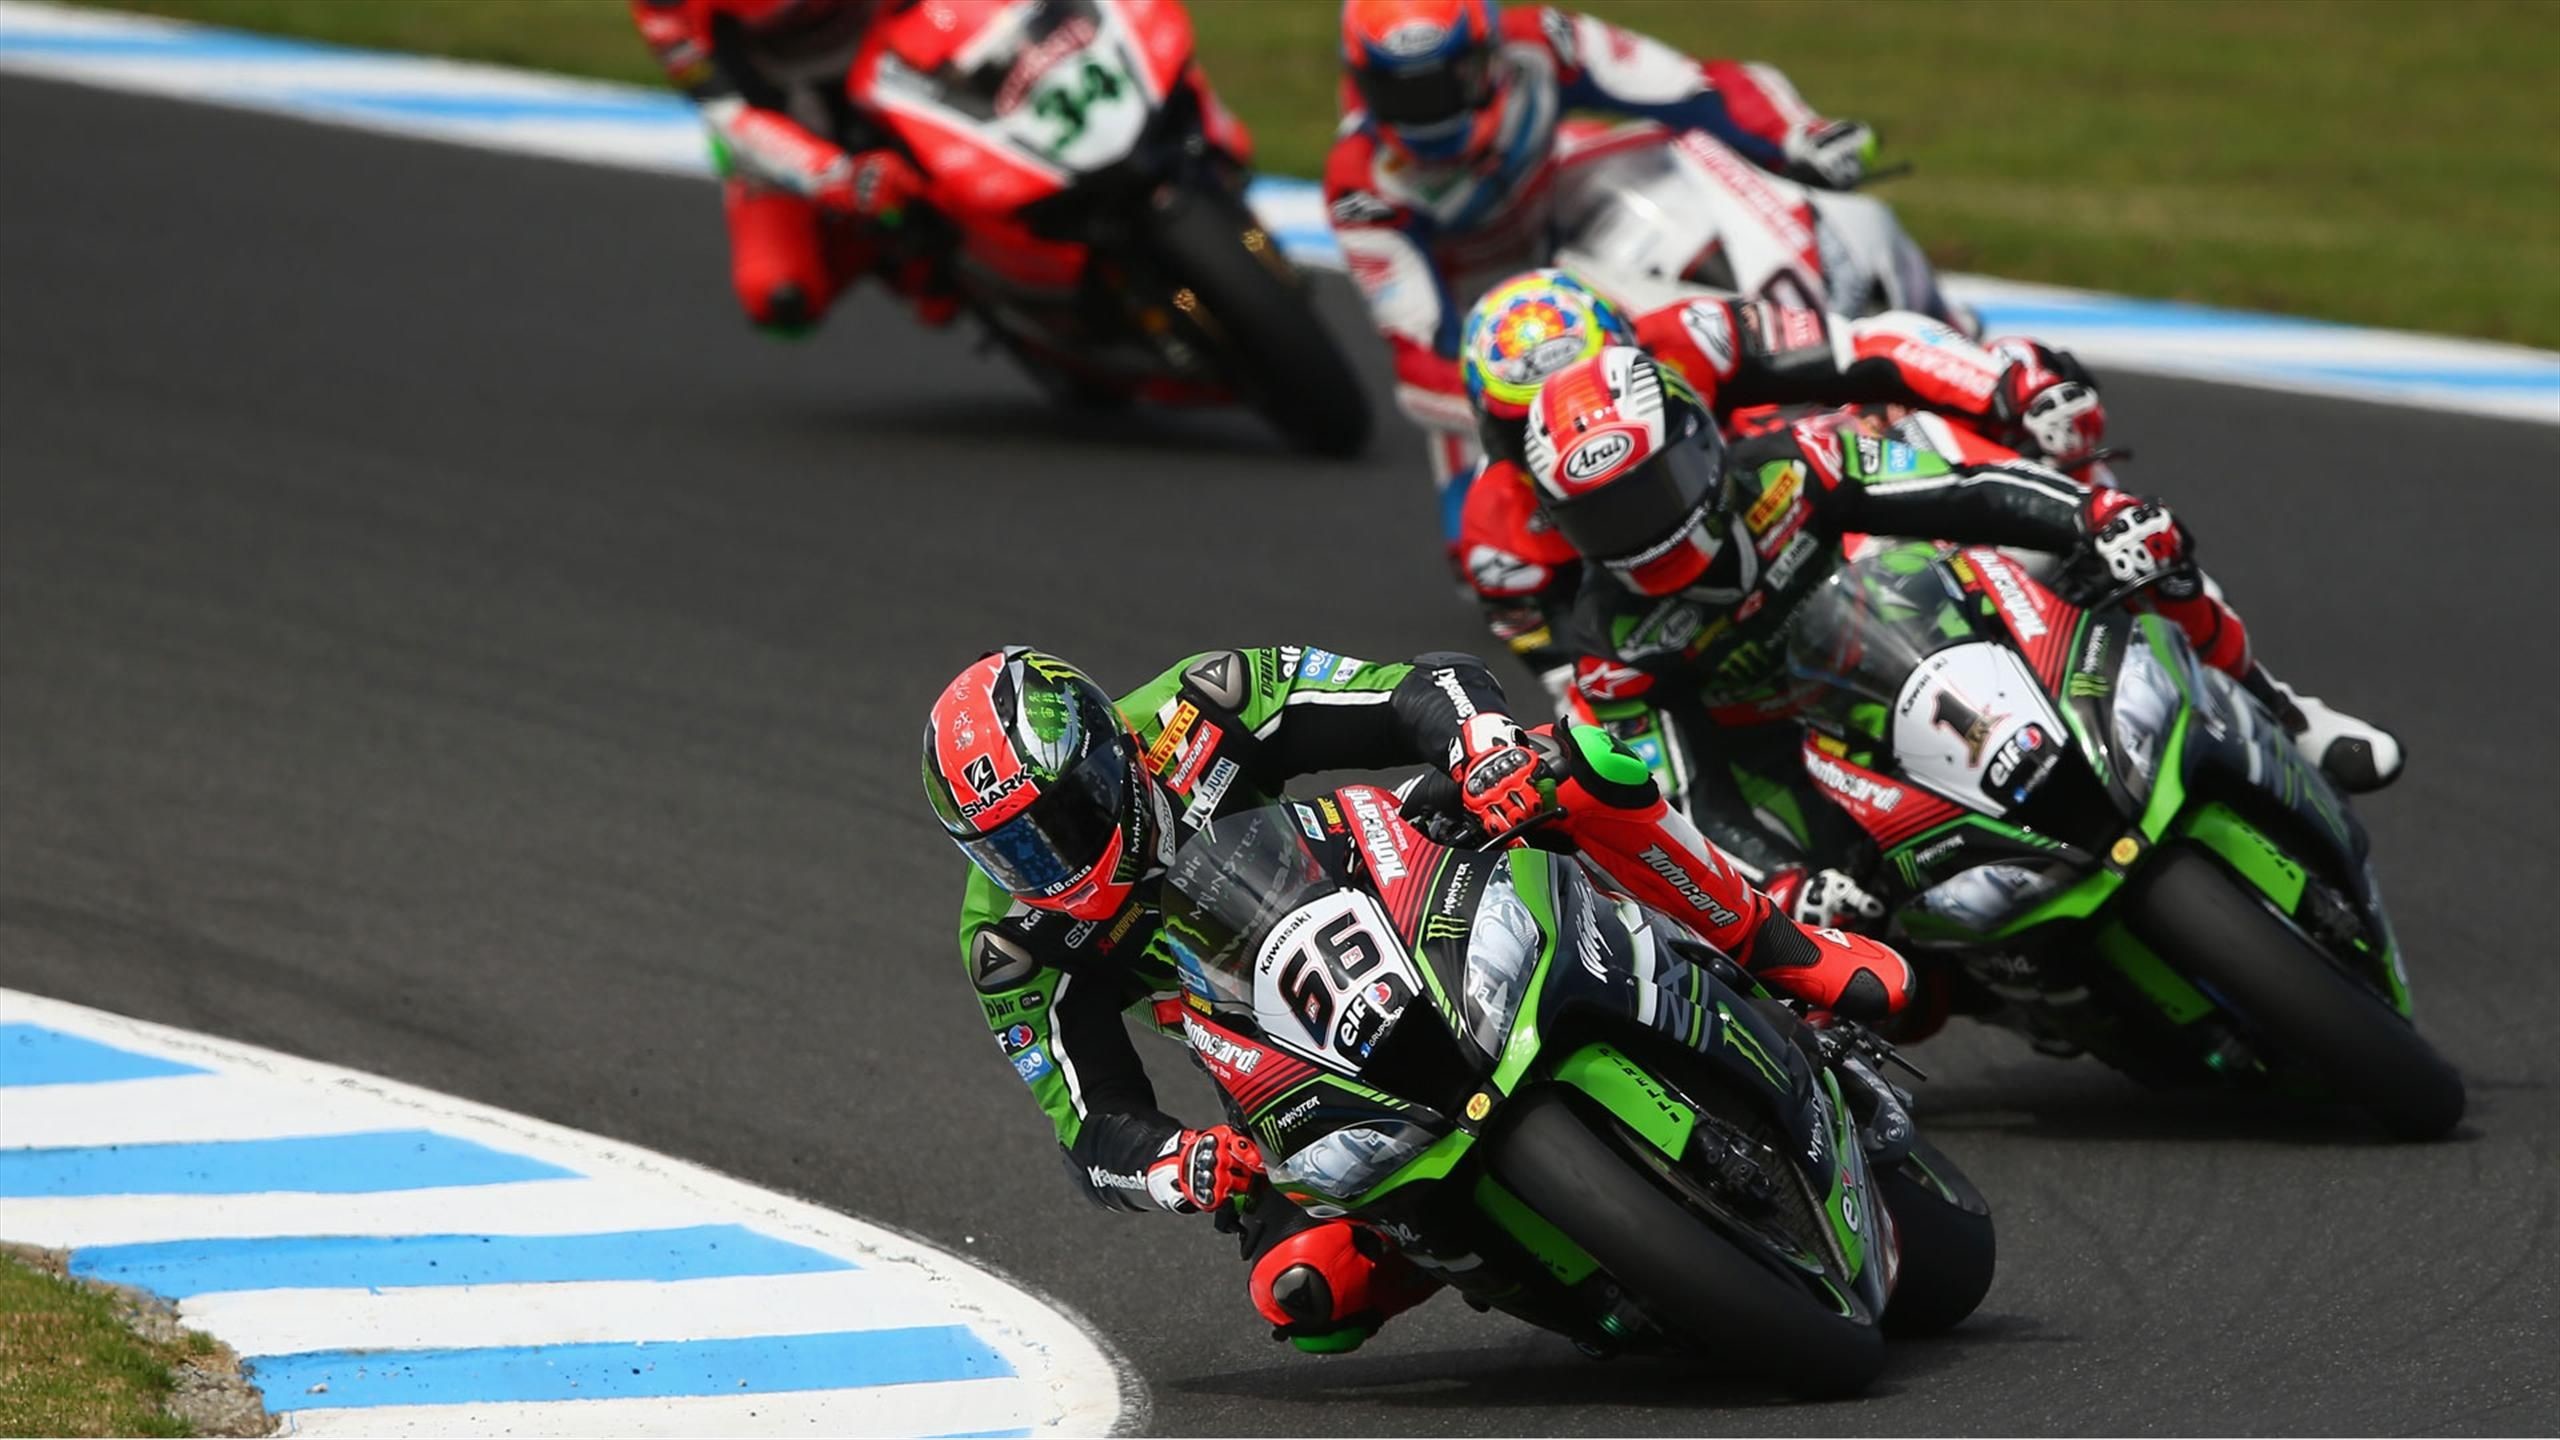 2560x1440 Jonathan Rea strengthened his grip on the World Superbikes title with a  comfortable win in Race 1 in Portugal.